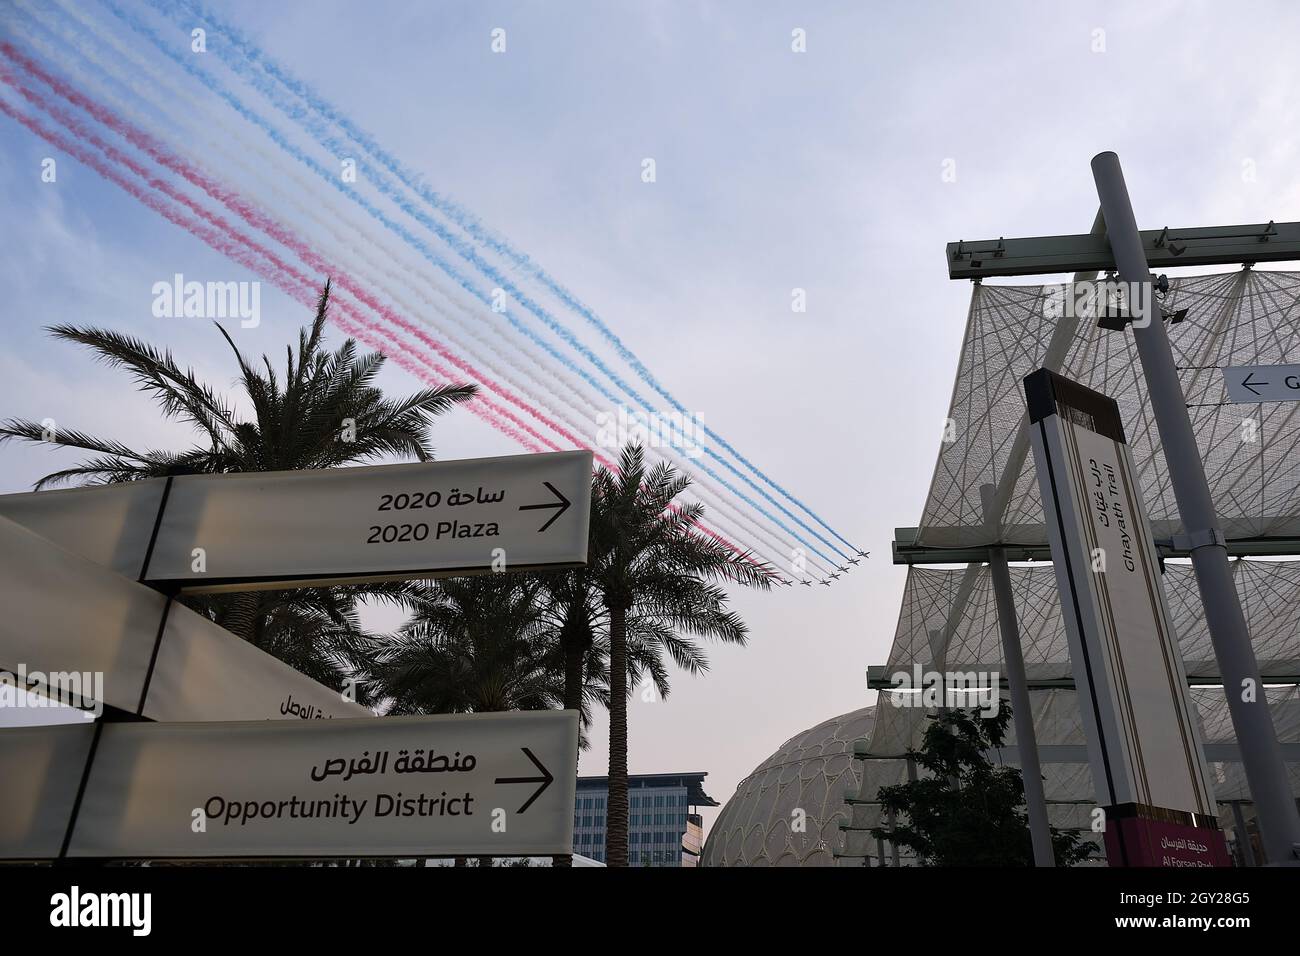 The Patrouille de France airshow with planes flying the French national colours over the Dubai Expo 2020 site, Dubai, UAE Stock Photo